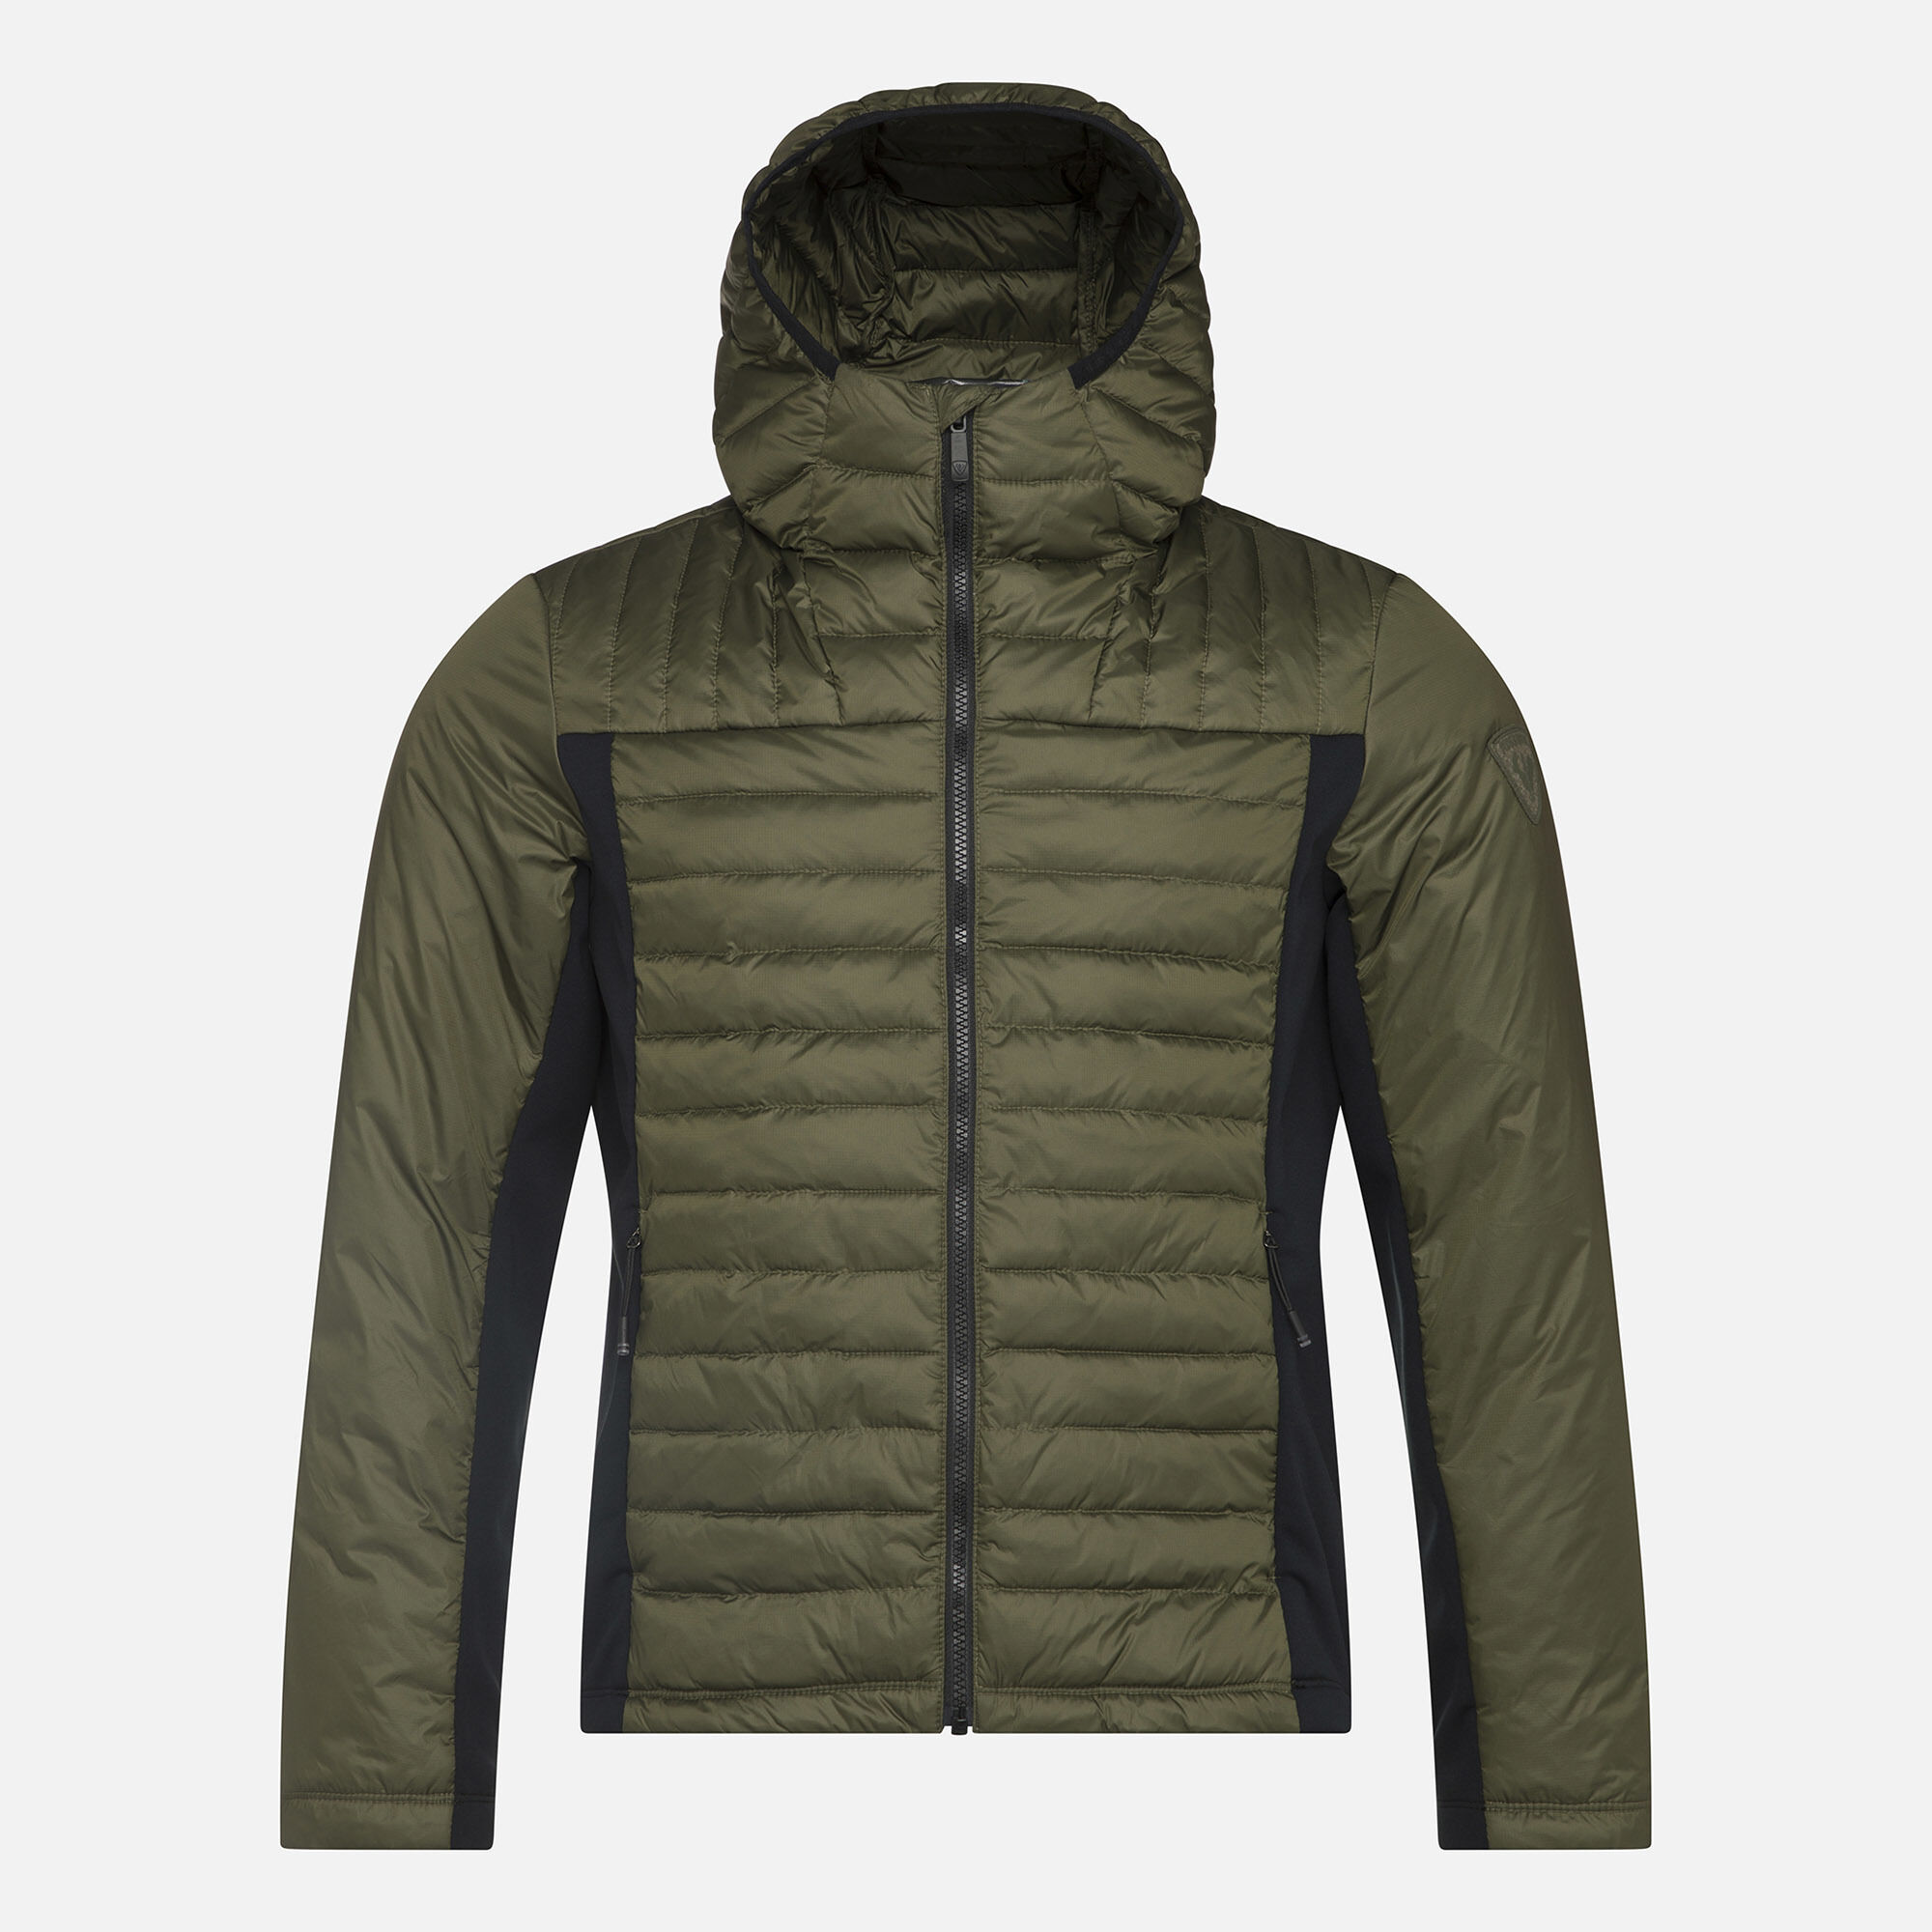 Mens Light And Thin Packable Down Coat Fashionable Outdoor Casual Garments  For Outdoor Activities From Deli1188, $24.37 | DHgate.Com